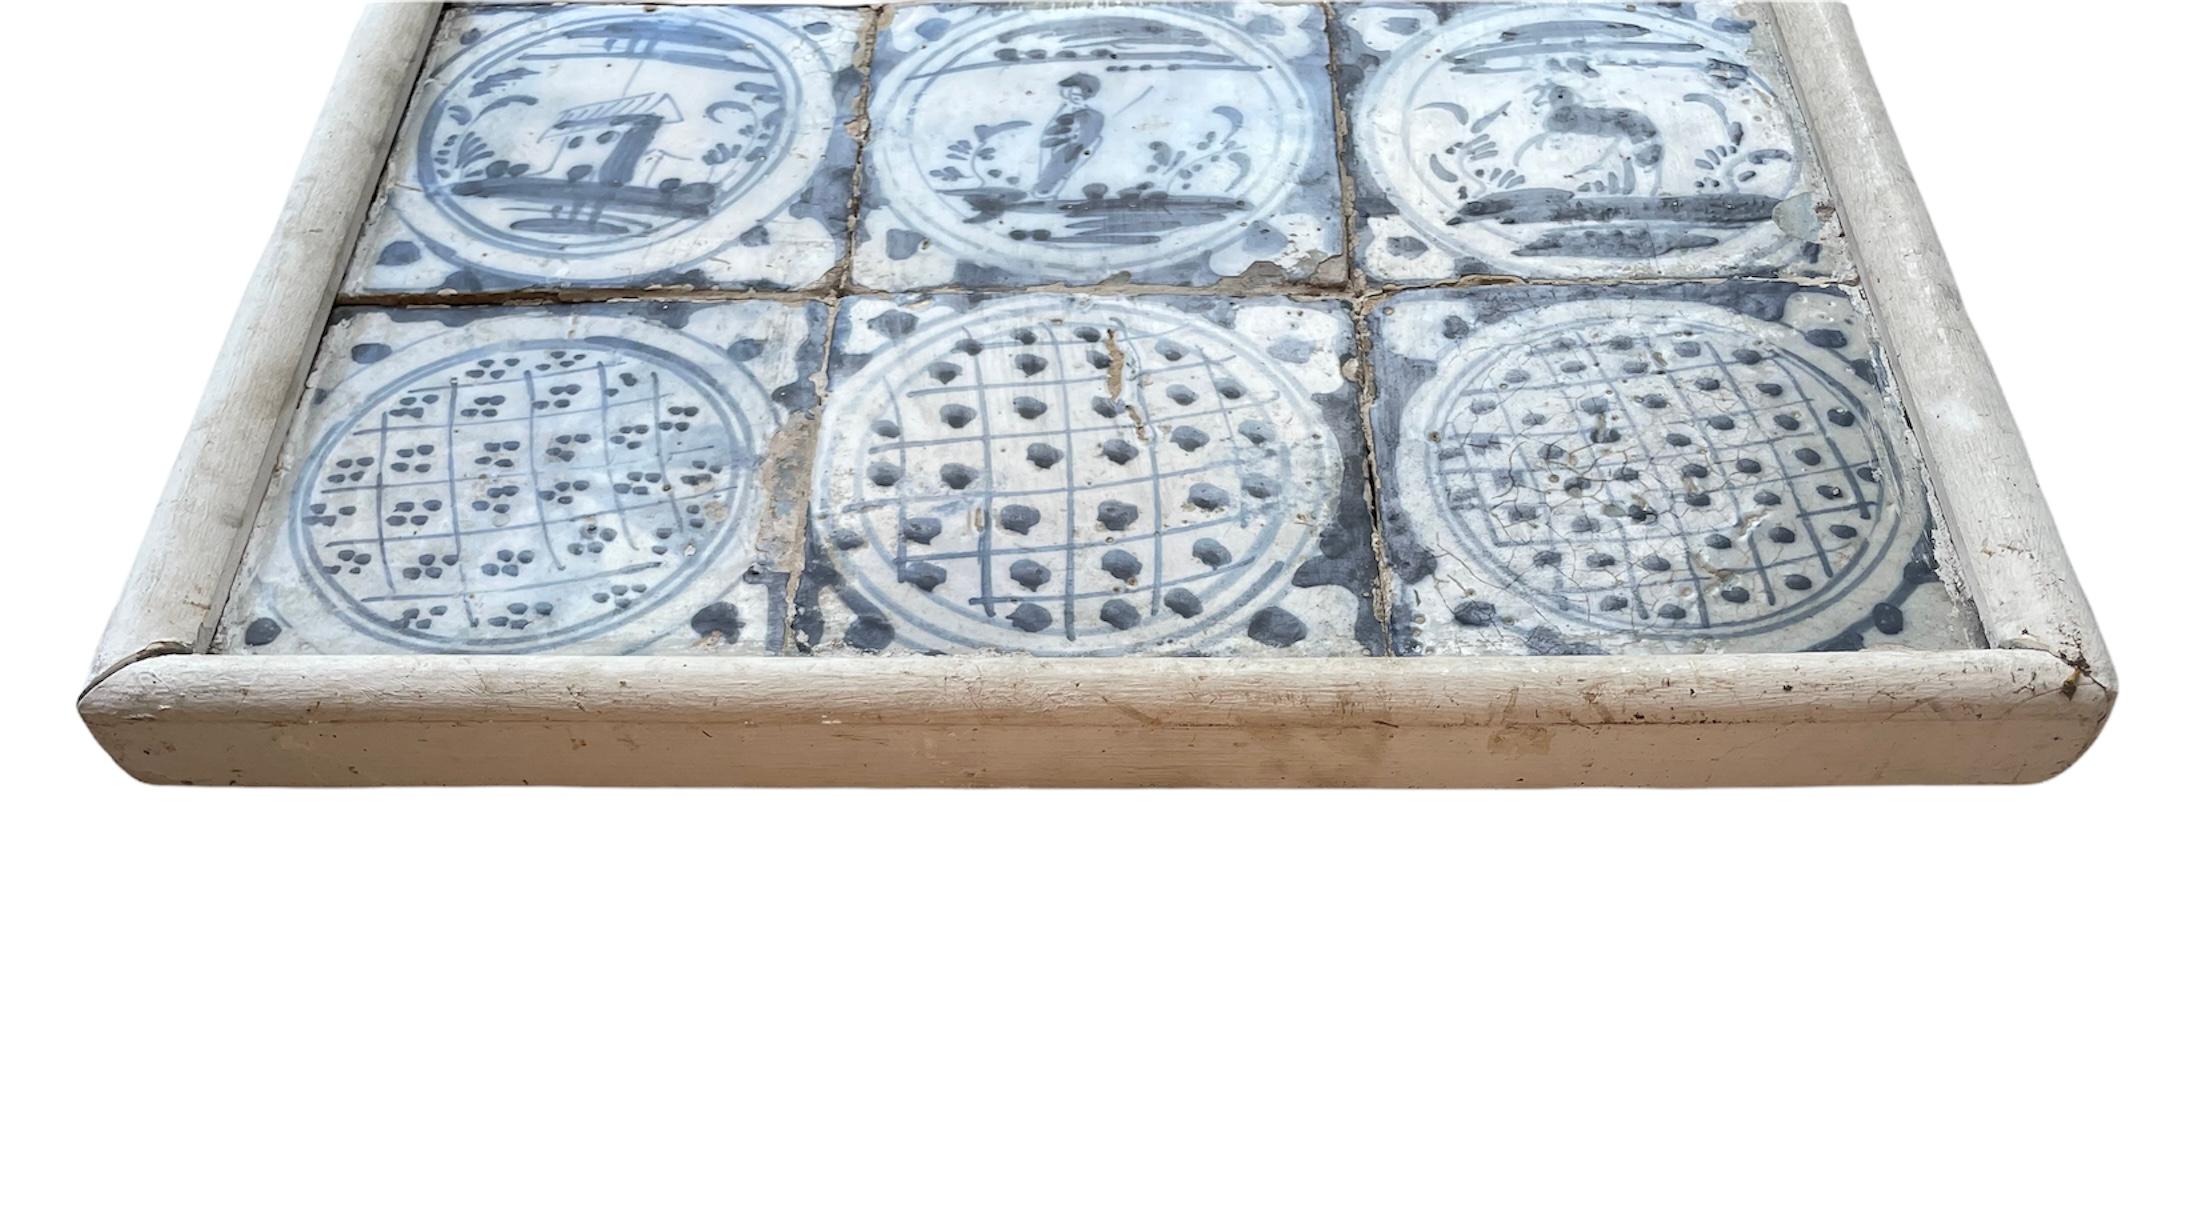 This is a small wood framed mural of “azulejos”or white and blue tiles. It consists of three rows of tiles and each one has three tiles. The first row depicts from left to right a star, a bird and a branch of flower. The second one depicts a rural